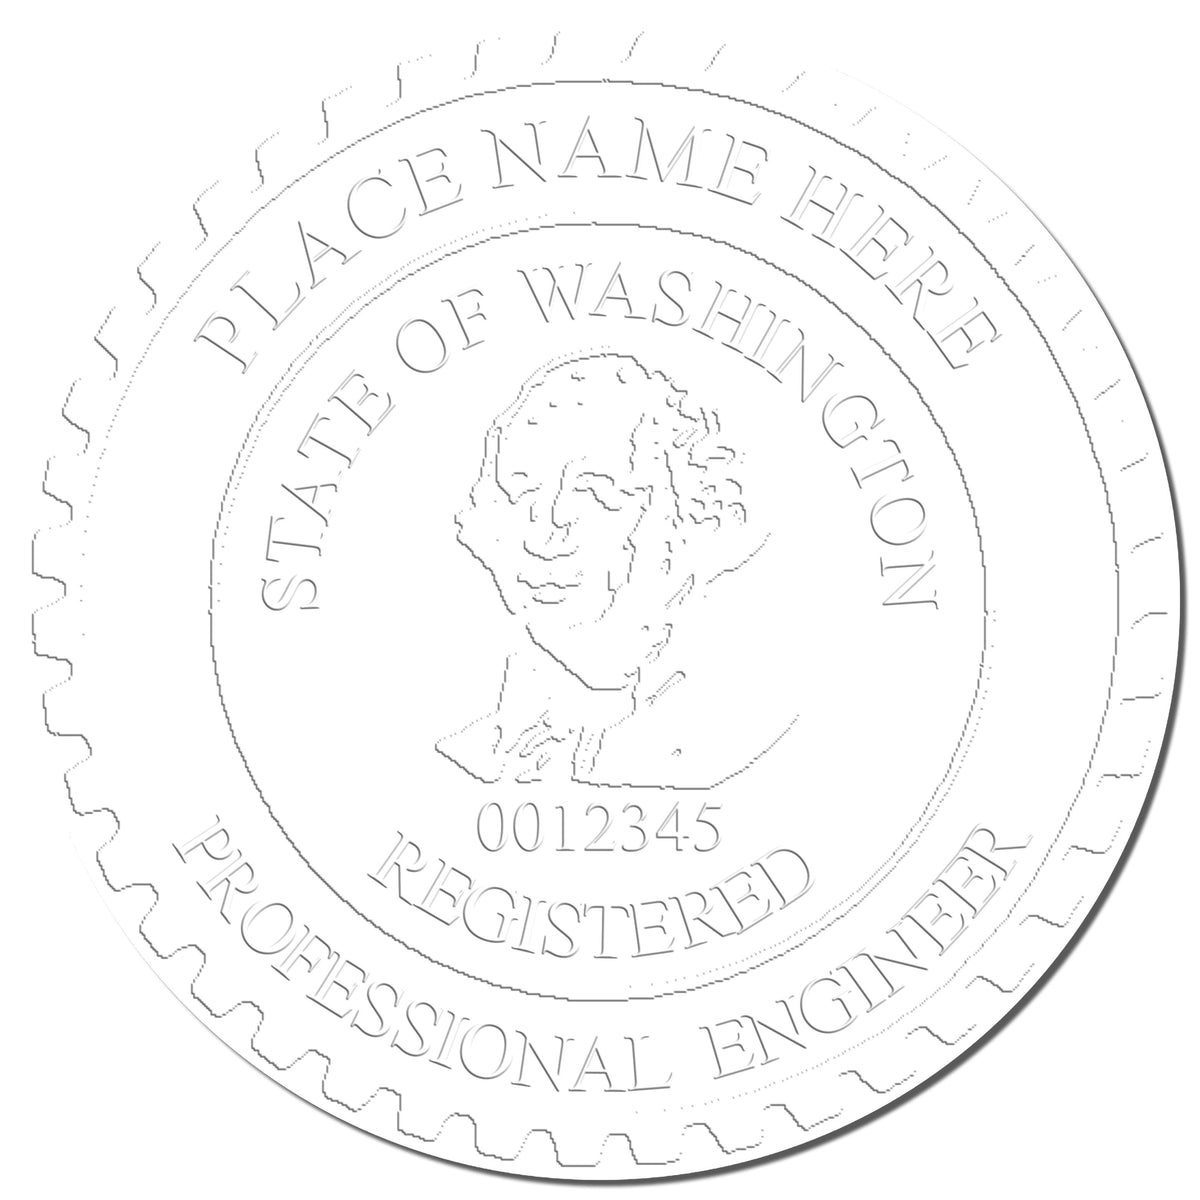 Another Example of a stamped impression of the Washington Engineer Desk Seal on a piece of office paper.